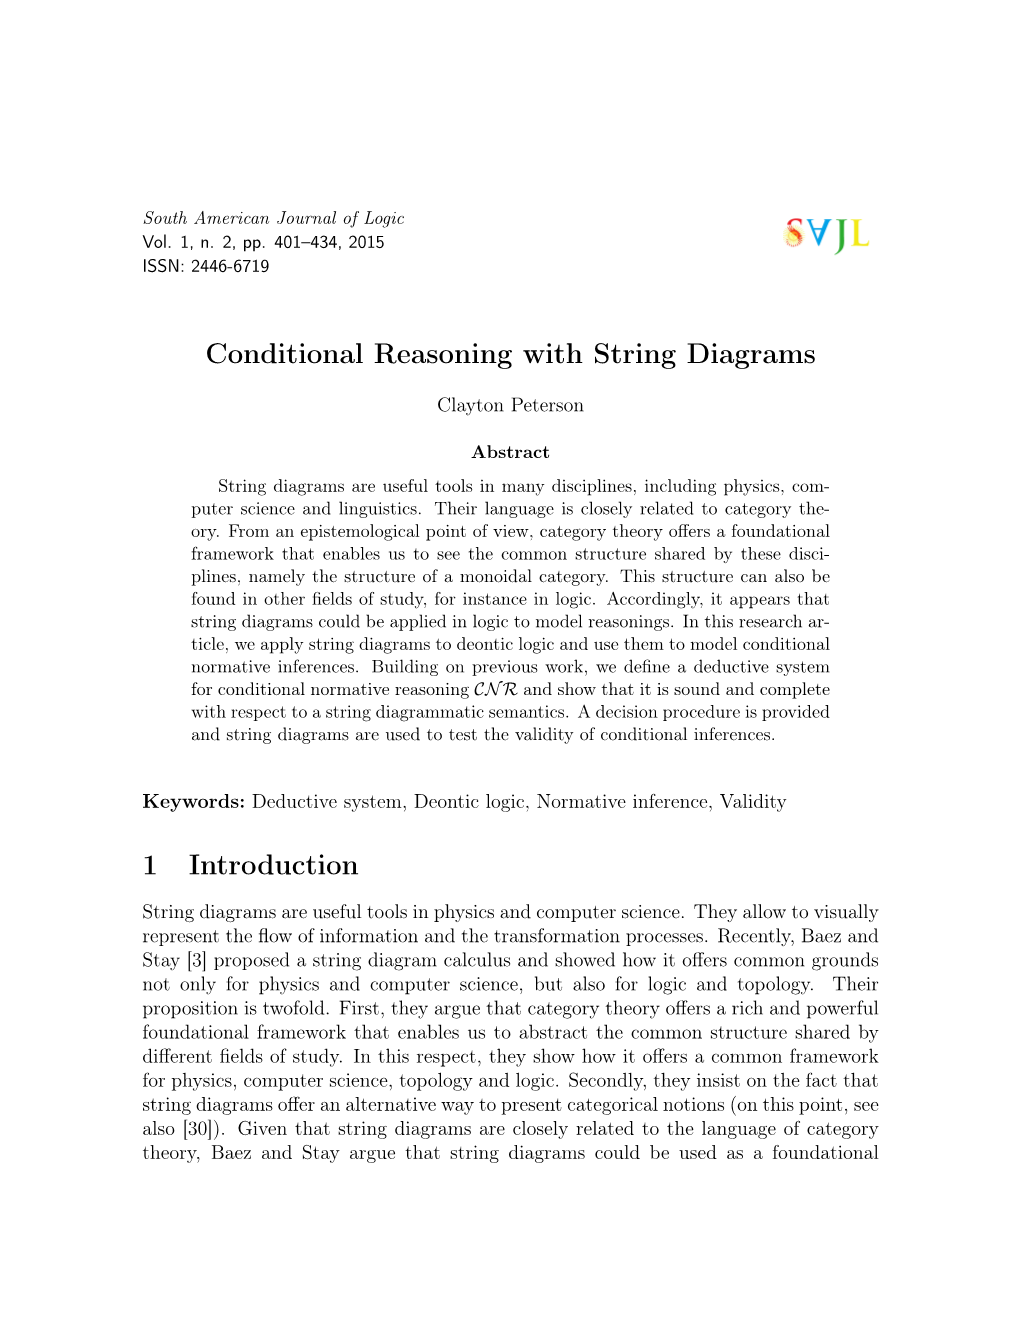 Conditional Reasoning with String Diagrams 1 Introduction